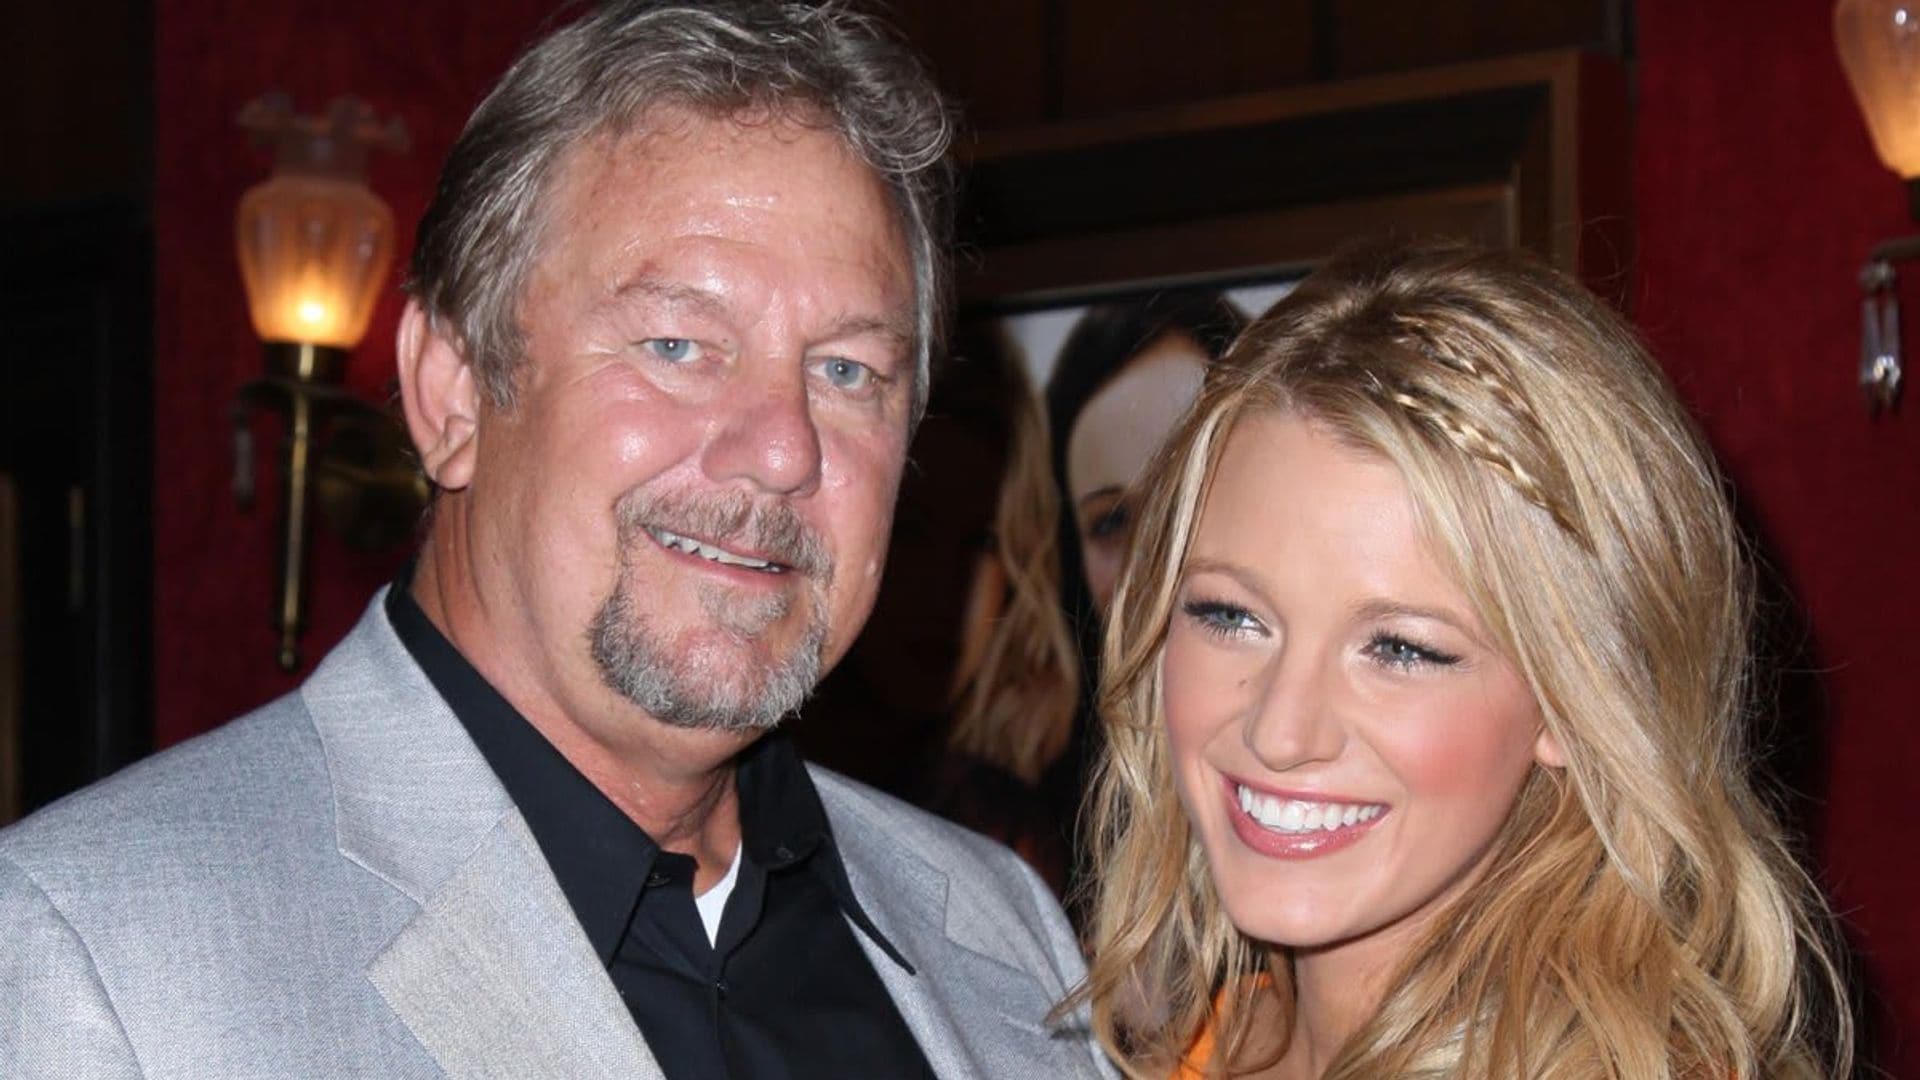 Blake Lively shares a touching photo with her dad after news of his passing